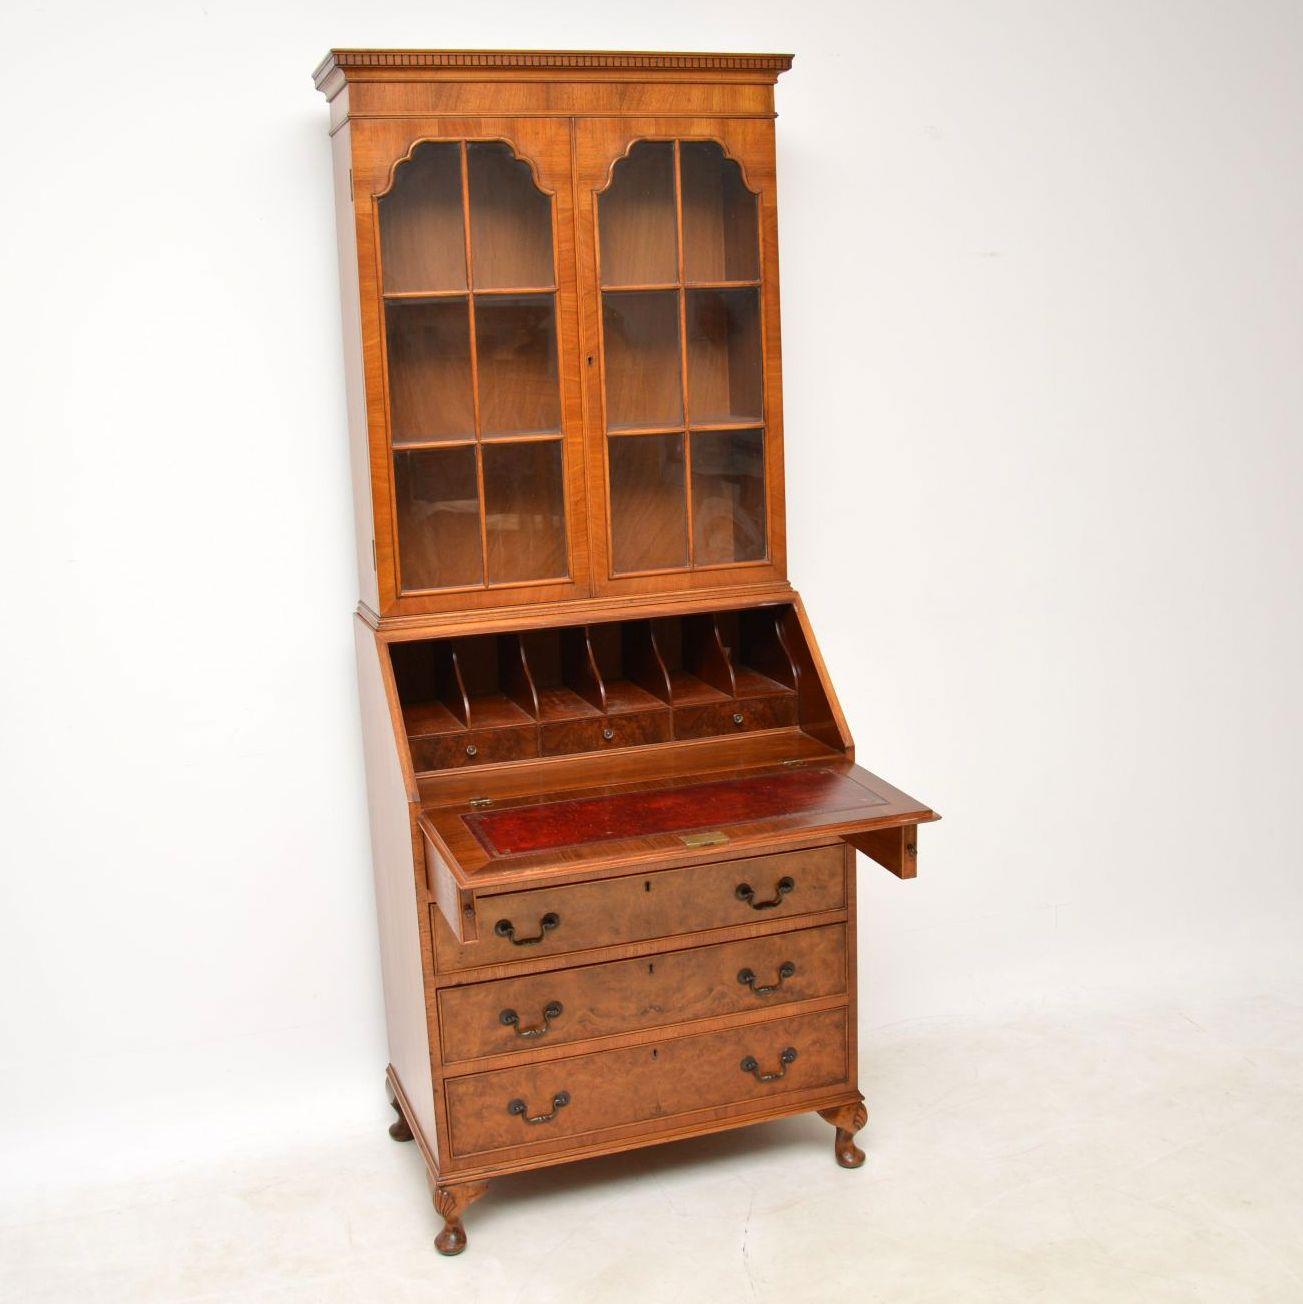 Antique burr walnut bureau bookcase with an astral-glazed bookcase section & bureau below, sitting on carved Queen Anne legs. It has a dental frieze under the cornice & two doors below with adjustable shelves. The bureau has a nice interior with